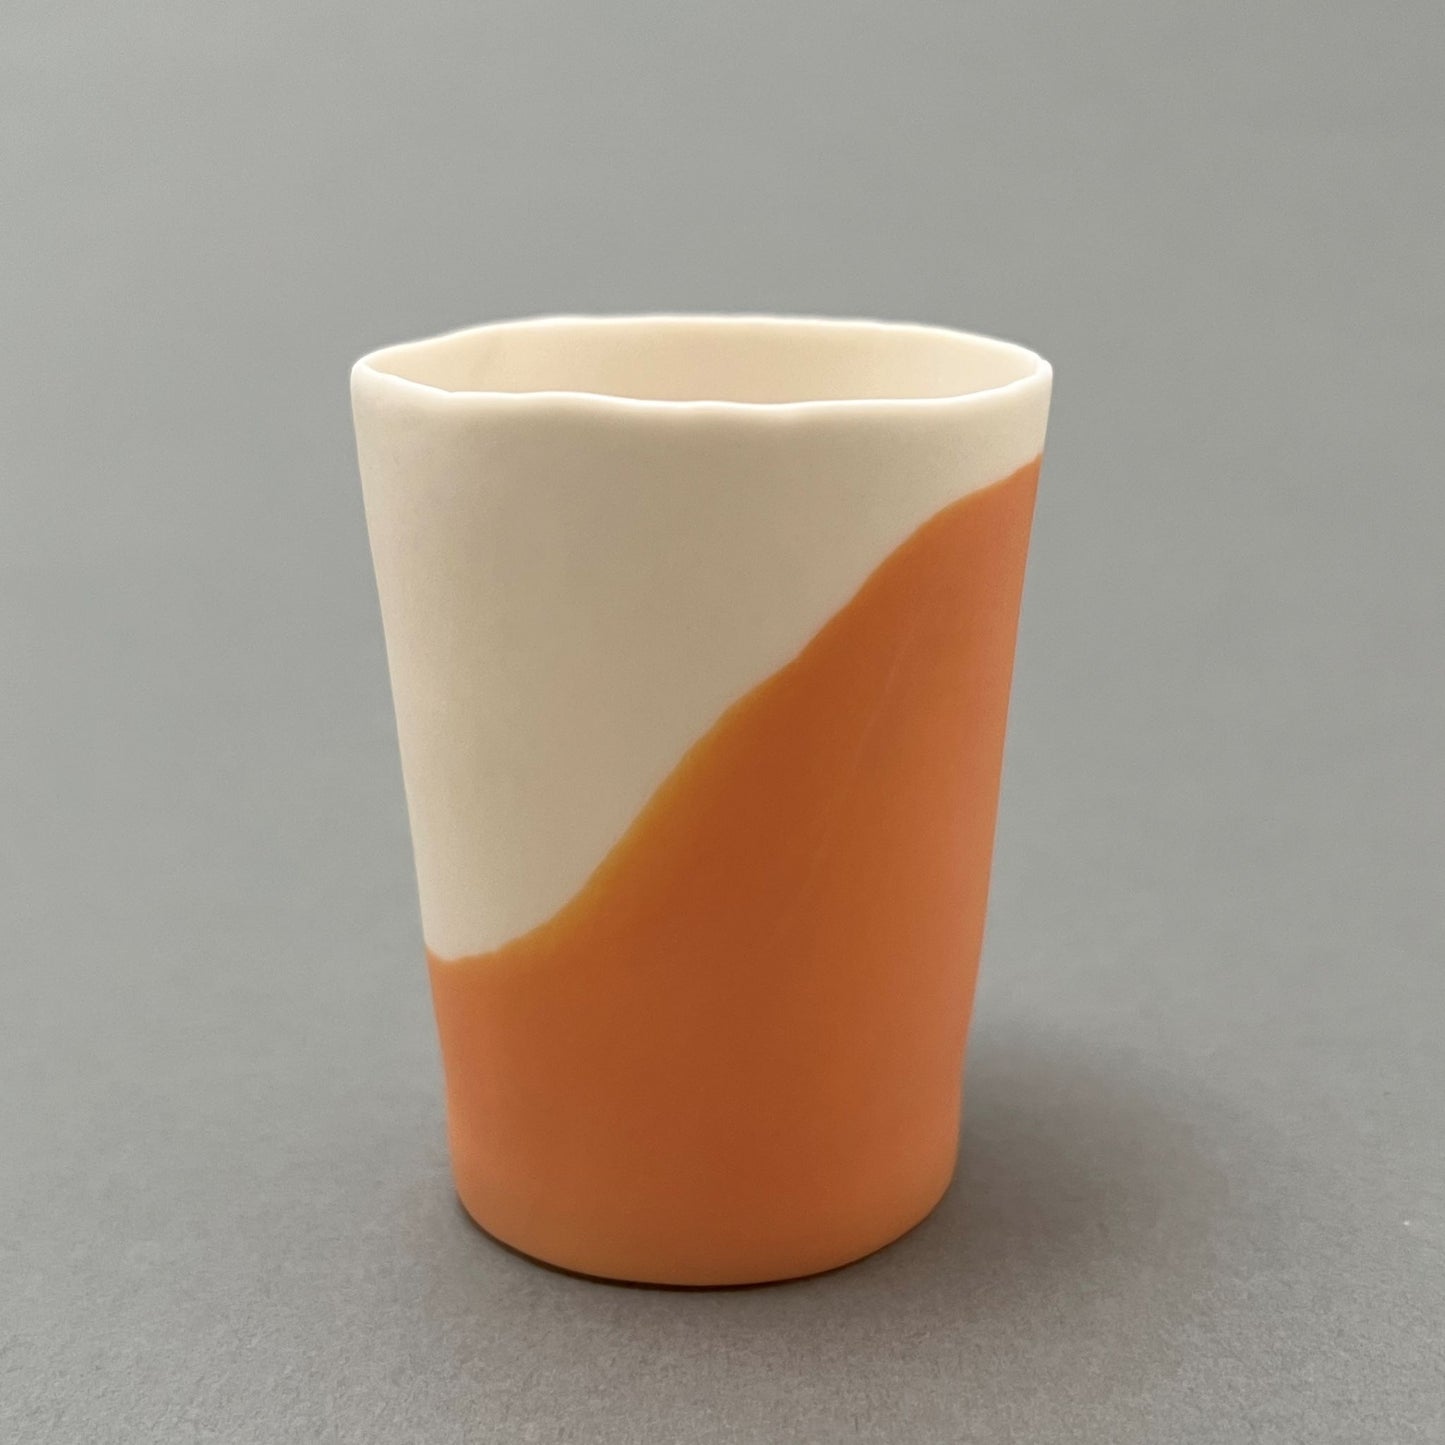 A small orange and white colored porcelain cup standing on a gray background